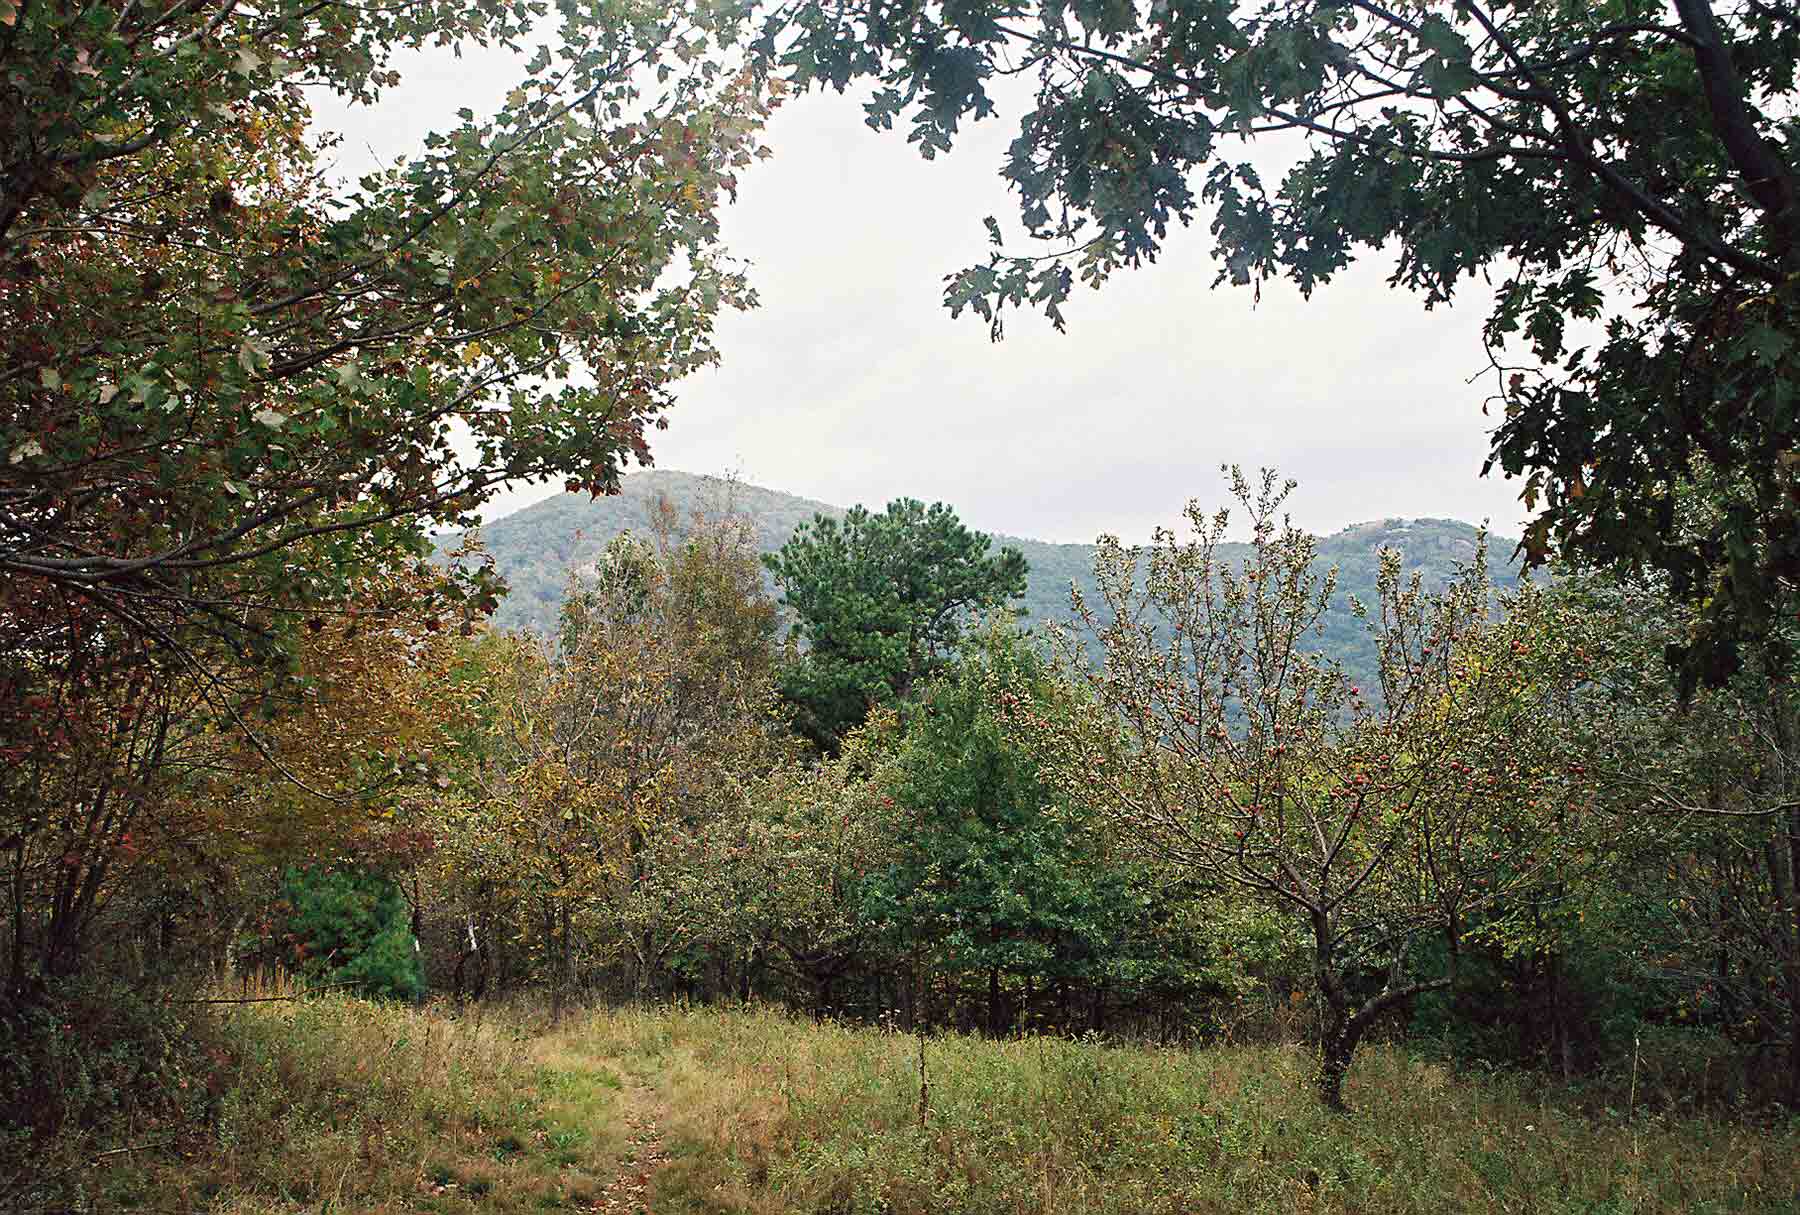 mm 0.8 - Maintop (on left) and Spy Rock as seen from old apple orchard on Porter Ridge trail south of Fish Hatchery Road (AKA Spy Rock Road). Courtesy dlcul@conncoll.edu